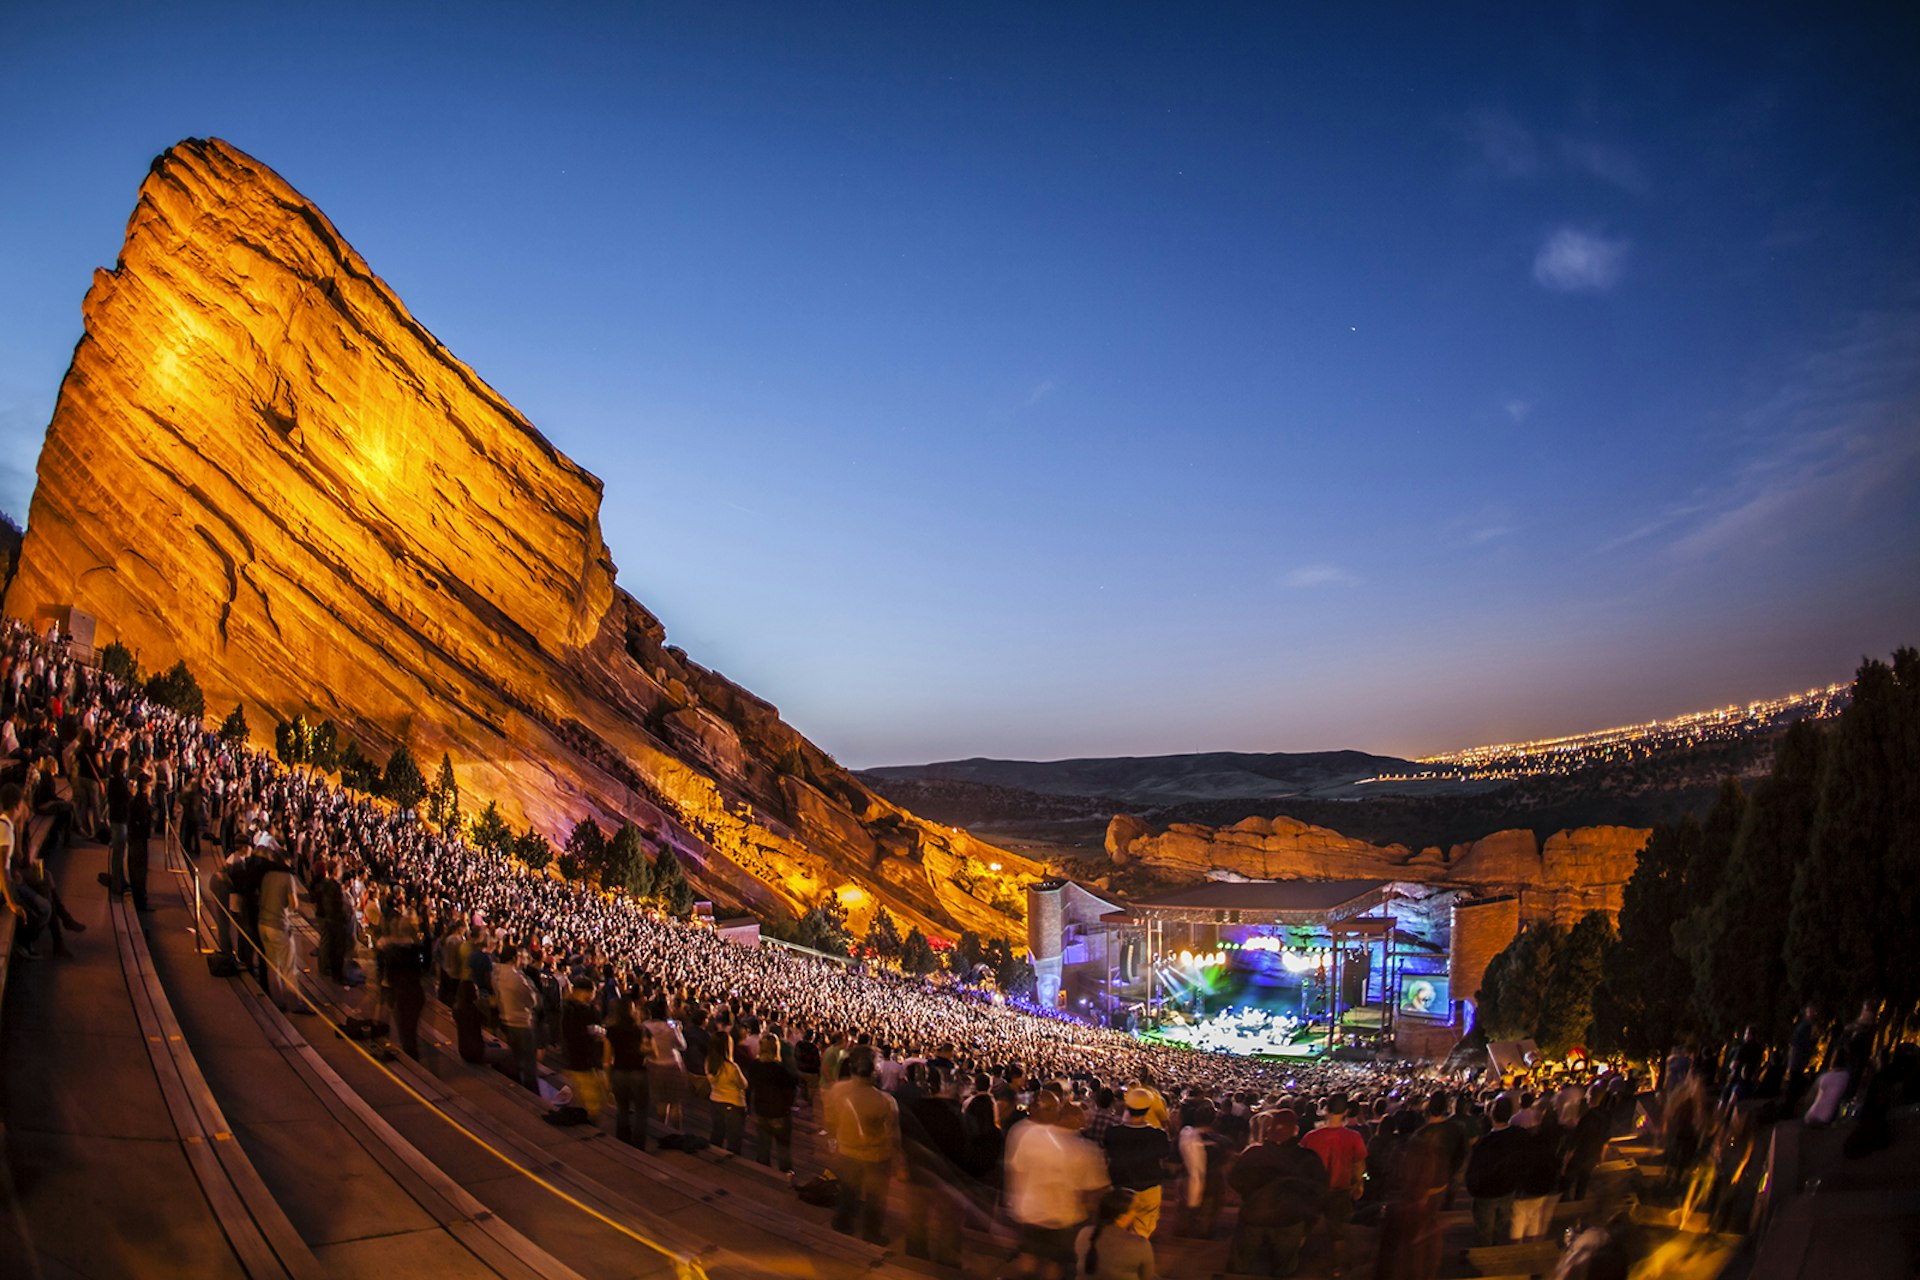 A crowd attends an evening concert at Red Rocks Amphitheater; one of the stone walls is visible, and the city of Denver glows behind the stage. Colorado.